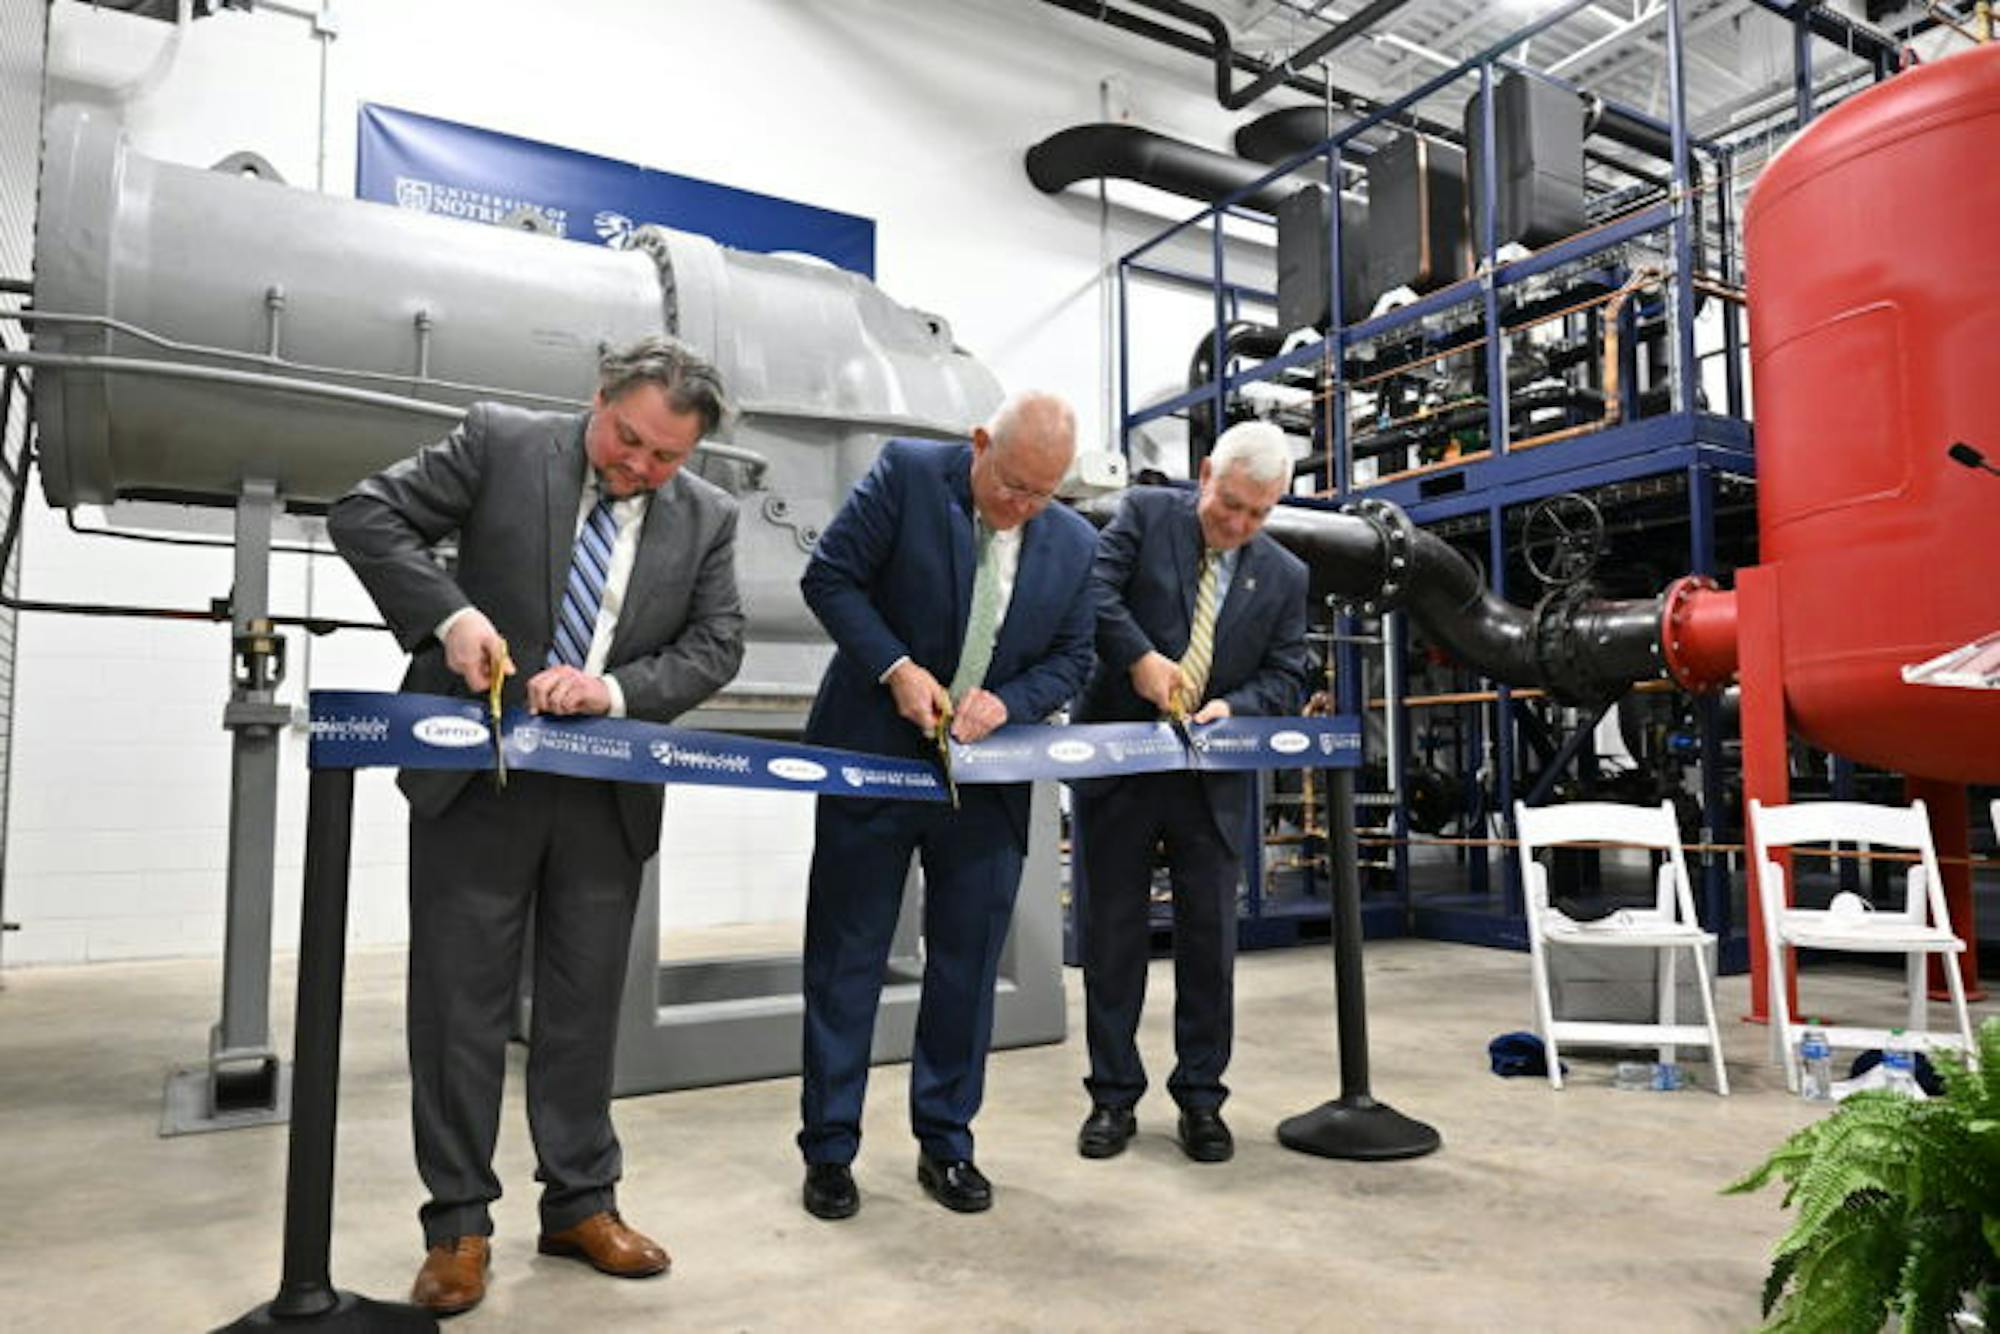 From left to right: Joshua Cameron, director of the Notre Dame Turbomachinery Laboratory, Chris Kmetz, senior vice president, engineering, for Carrier and Bob Bernhard, University of Notre Dame vice president for research cut the ribbon on the Willis Carrier Centrifugal Compressor Technology Laboratory at the Notre Dame Turbomachinery Lab in South Bend on Feb. 22.